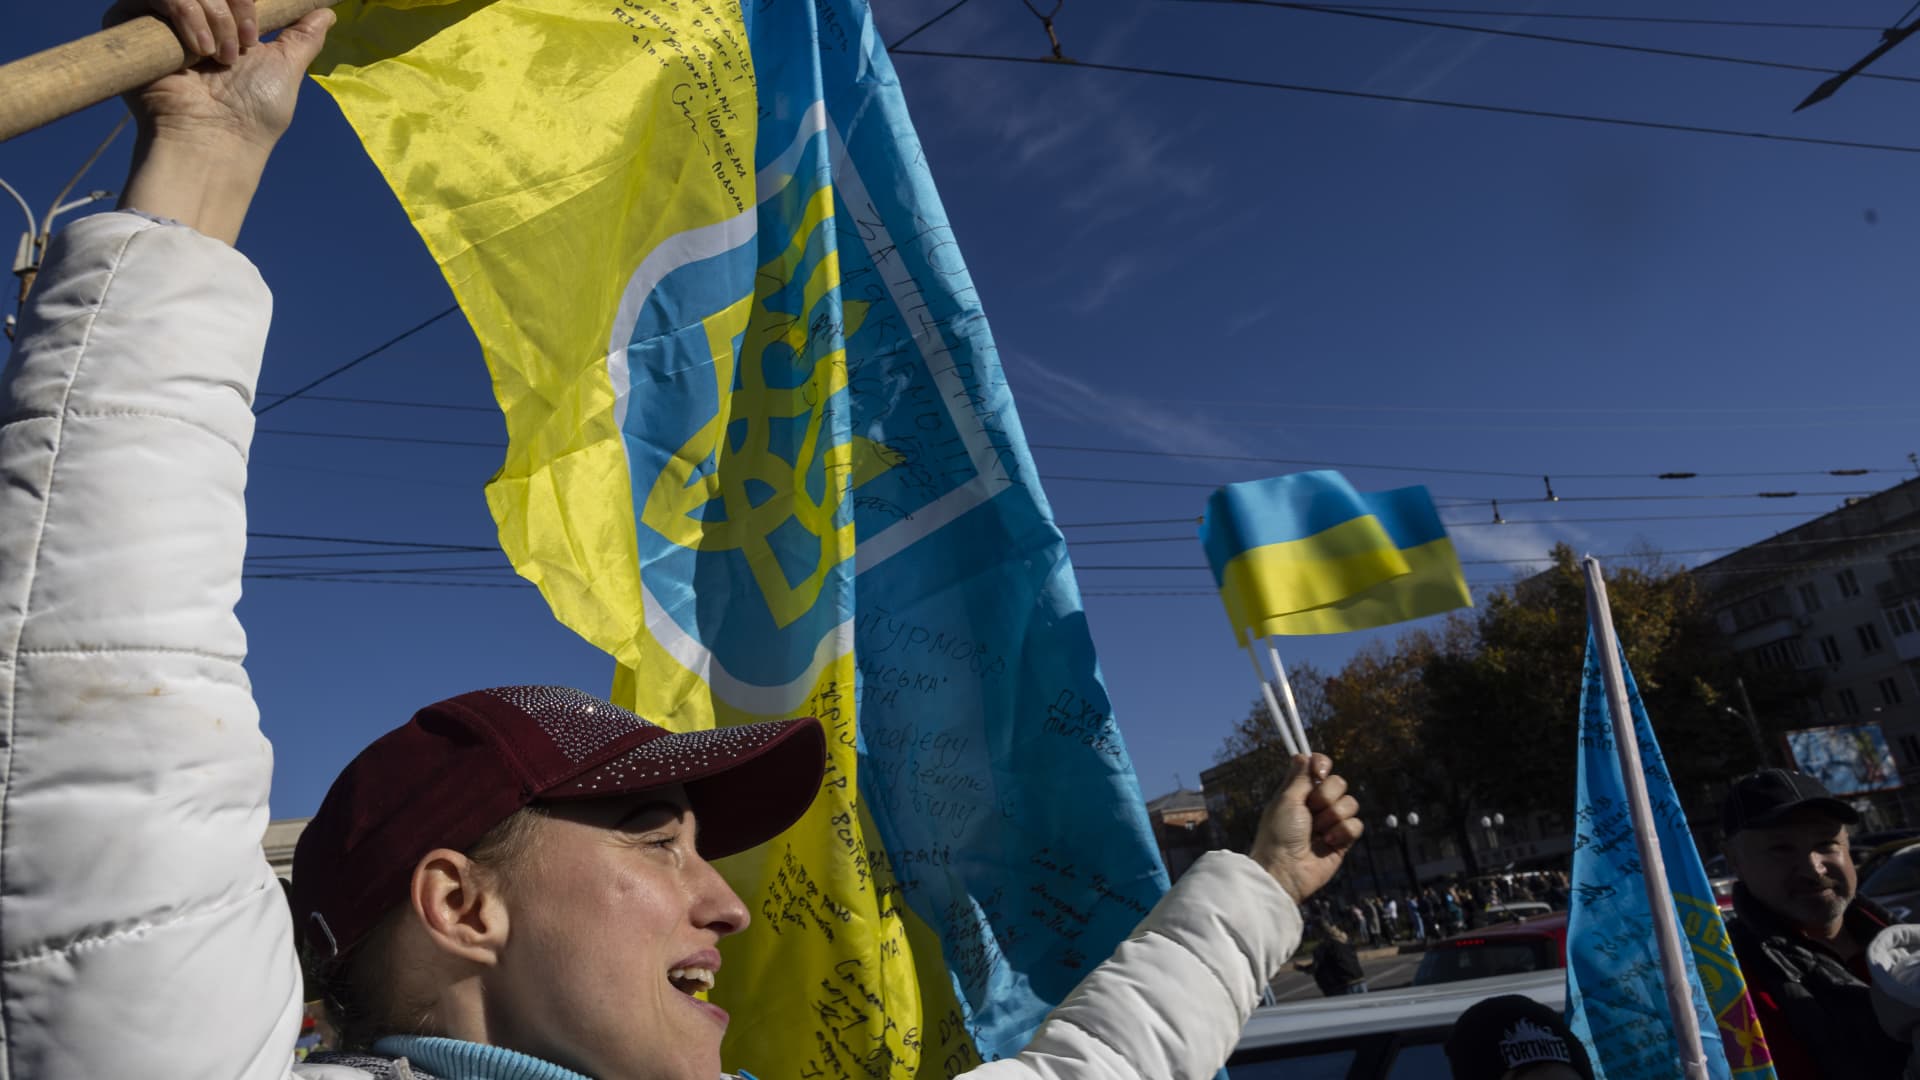 A woman celebrates Ukrainian troops' liberation of Kherson city on Monday, Nov. 14. President Volodymyr Zelenskyy made a surprise visit to the city after Russian forces fled to the other side of the Dnipro River.